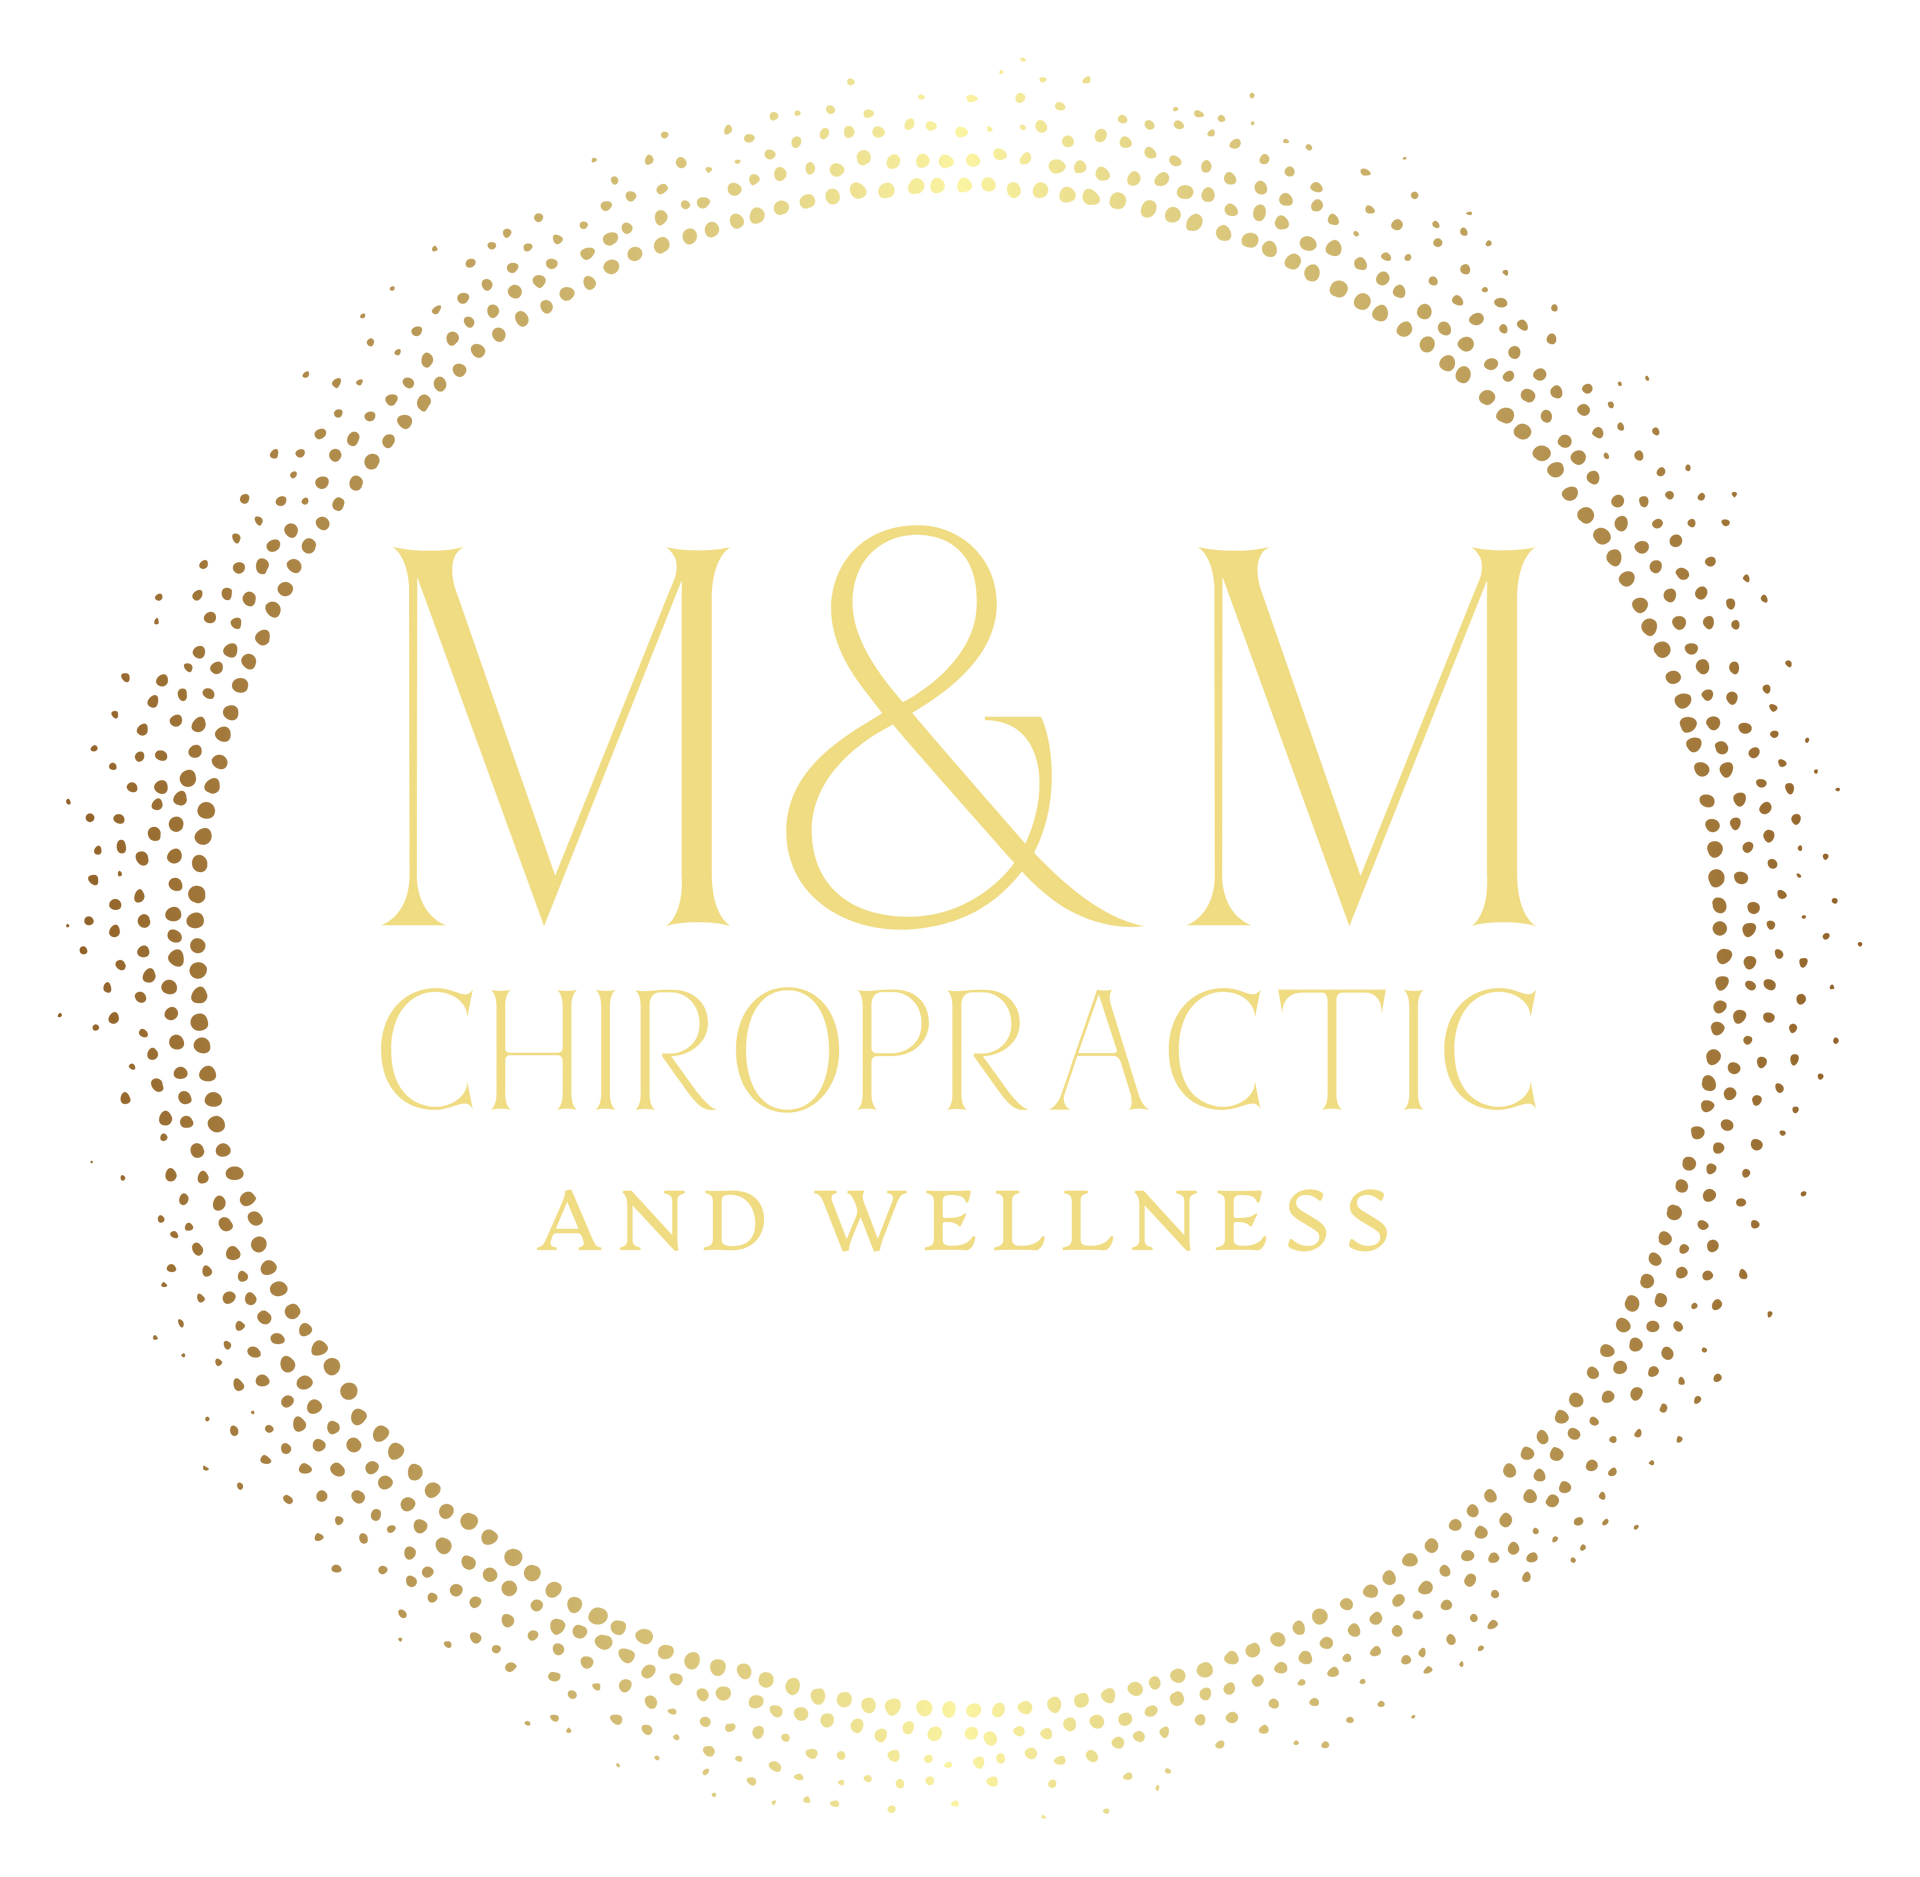 A gold logo for m & m chiropractic and wellness